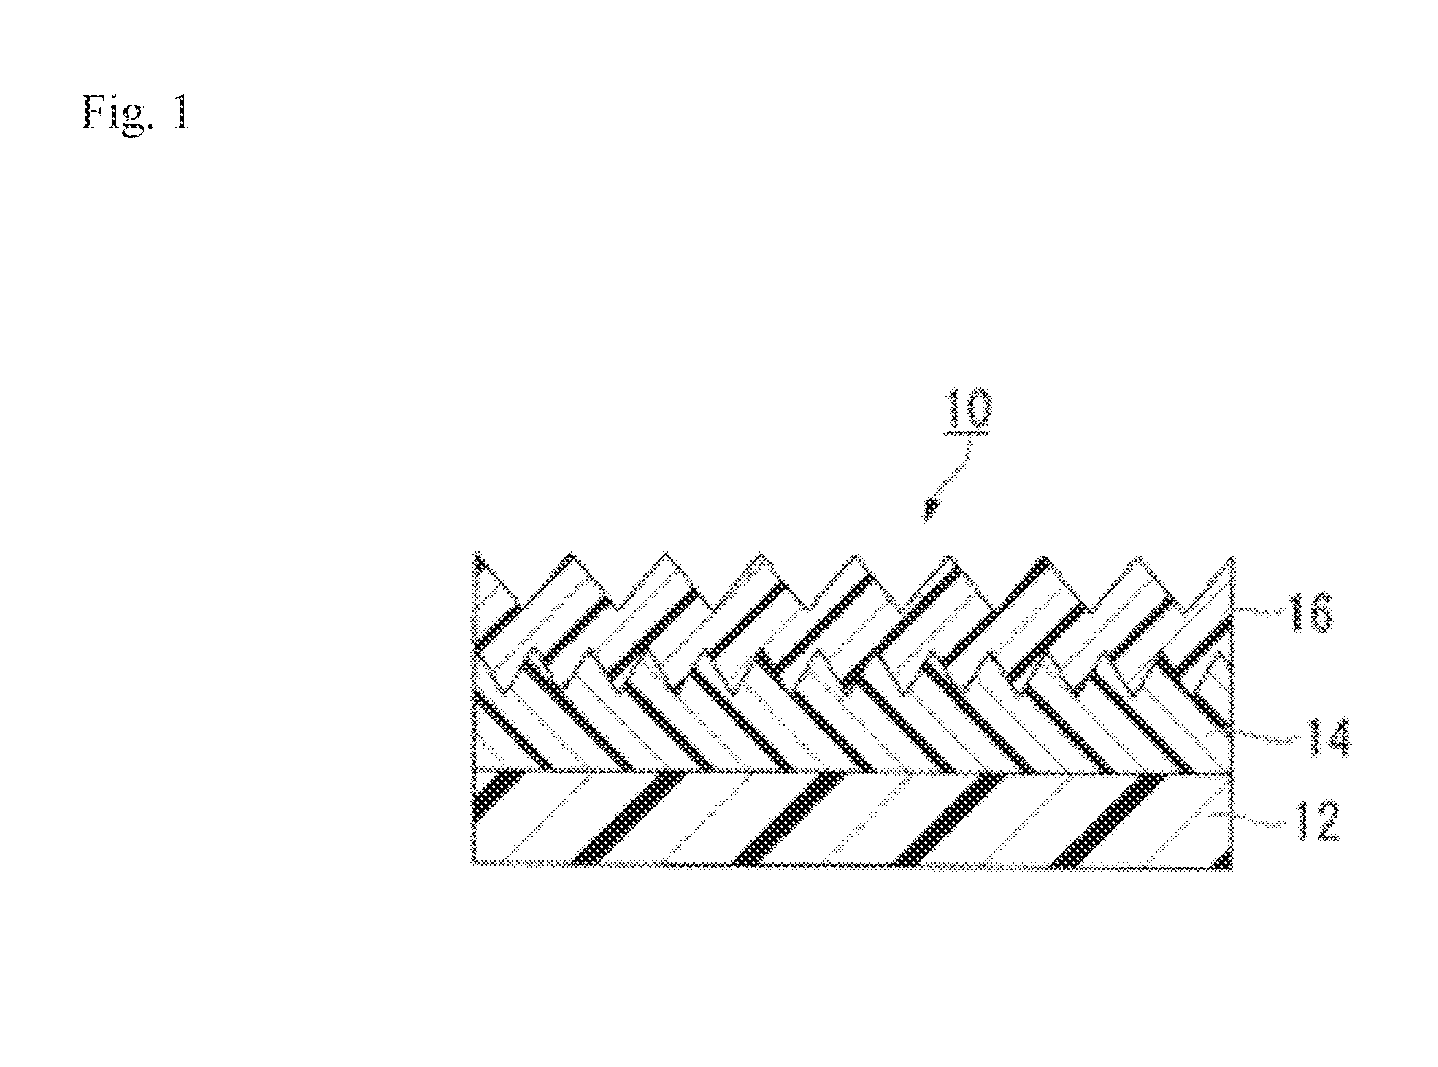 Multilayer structure, method for producing same, and article